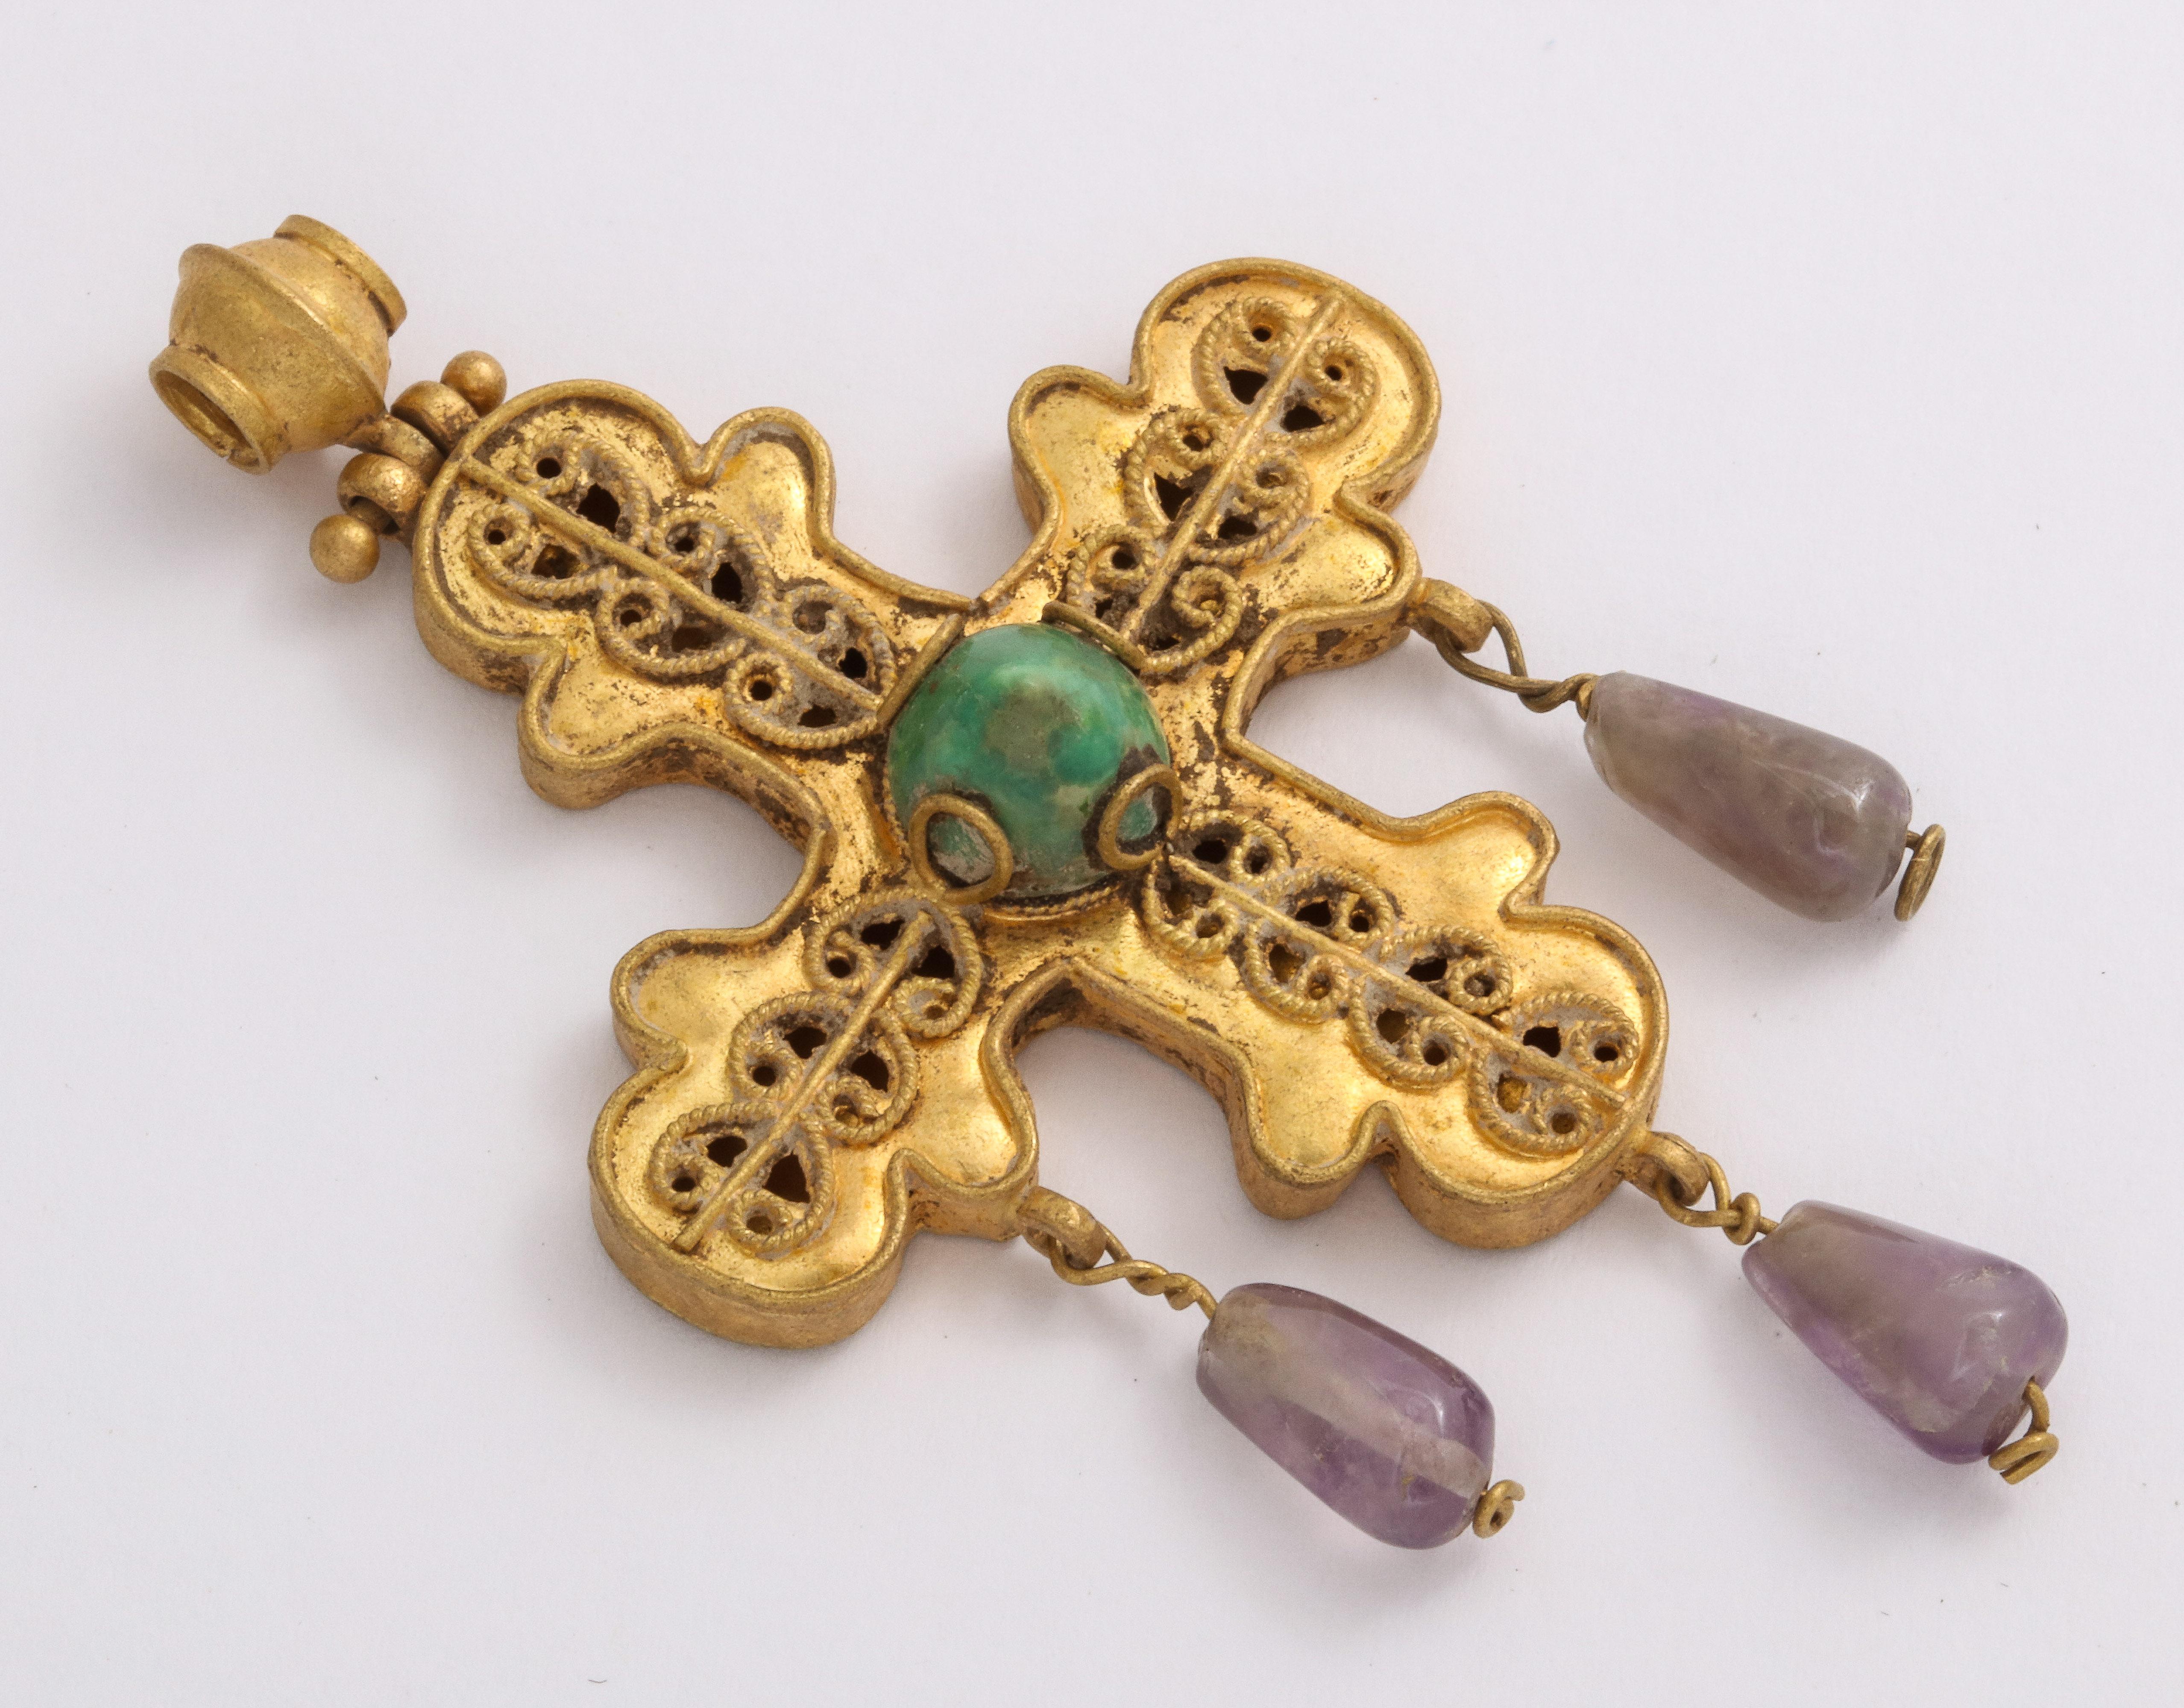 Made from the fine jewelers of the Byzantine period, known for their quality, this magnificent openwork cross suspends three teardrop amethyst stones and is centered with a conical emerald. Enlarge the images and take in the openwork that is